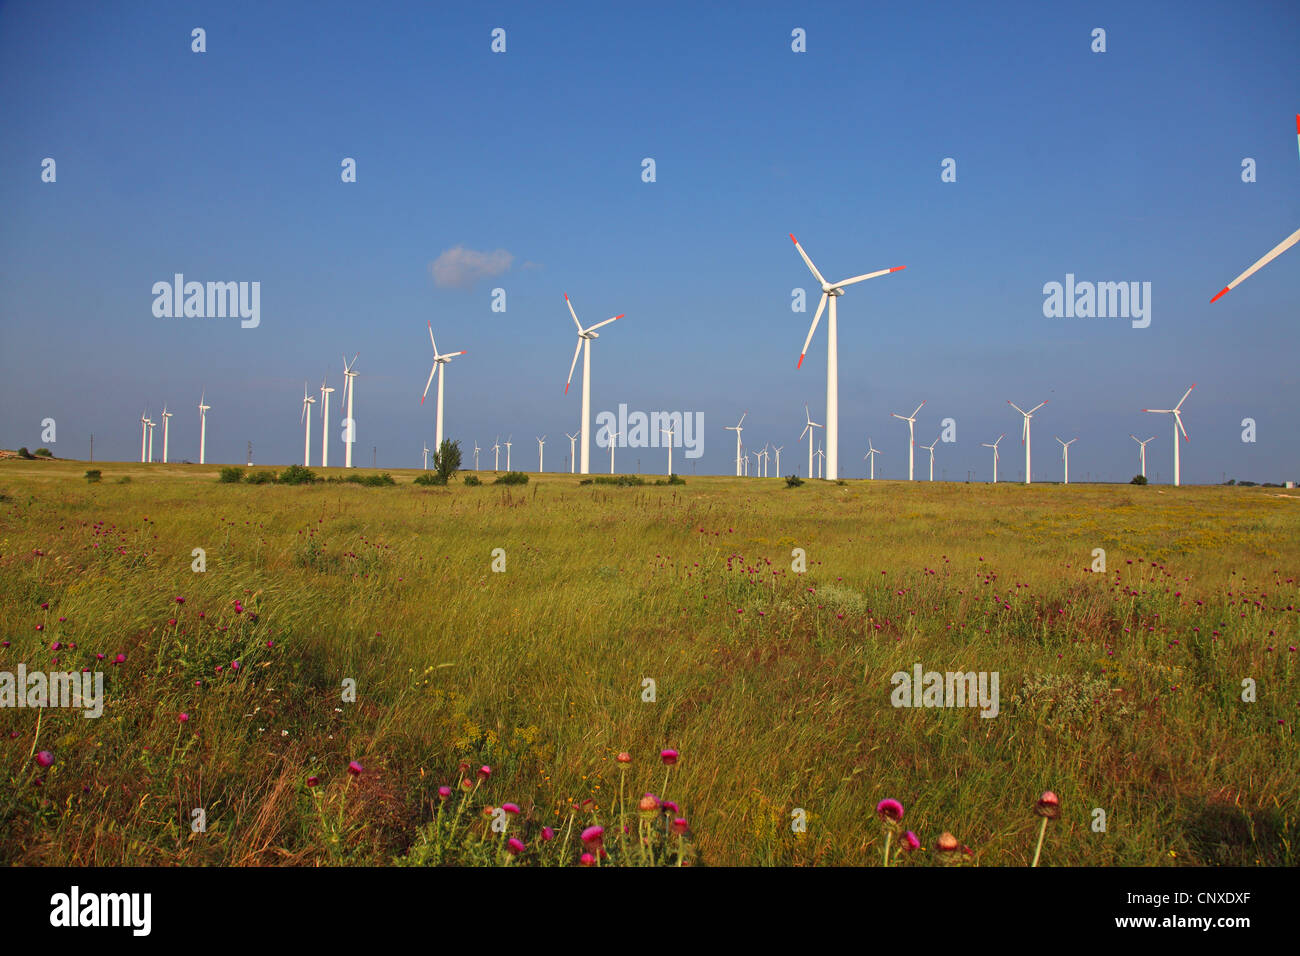 Wind farm in meadow, Bulgarie, Kaliakra Banque D'Images